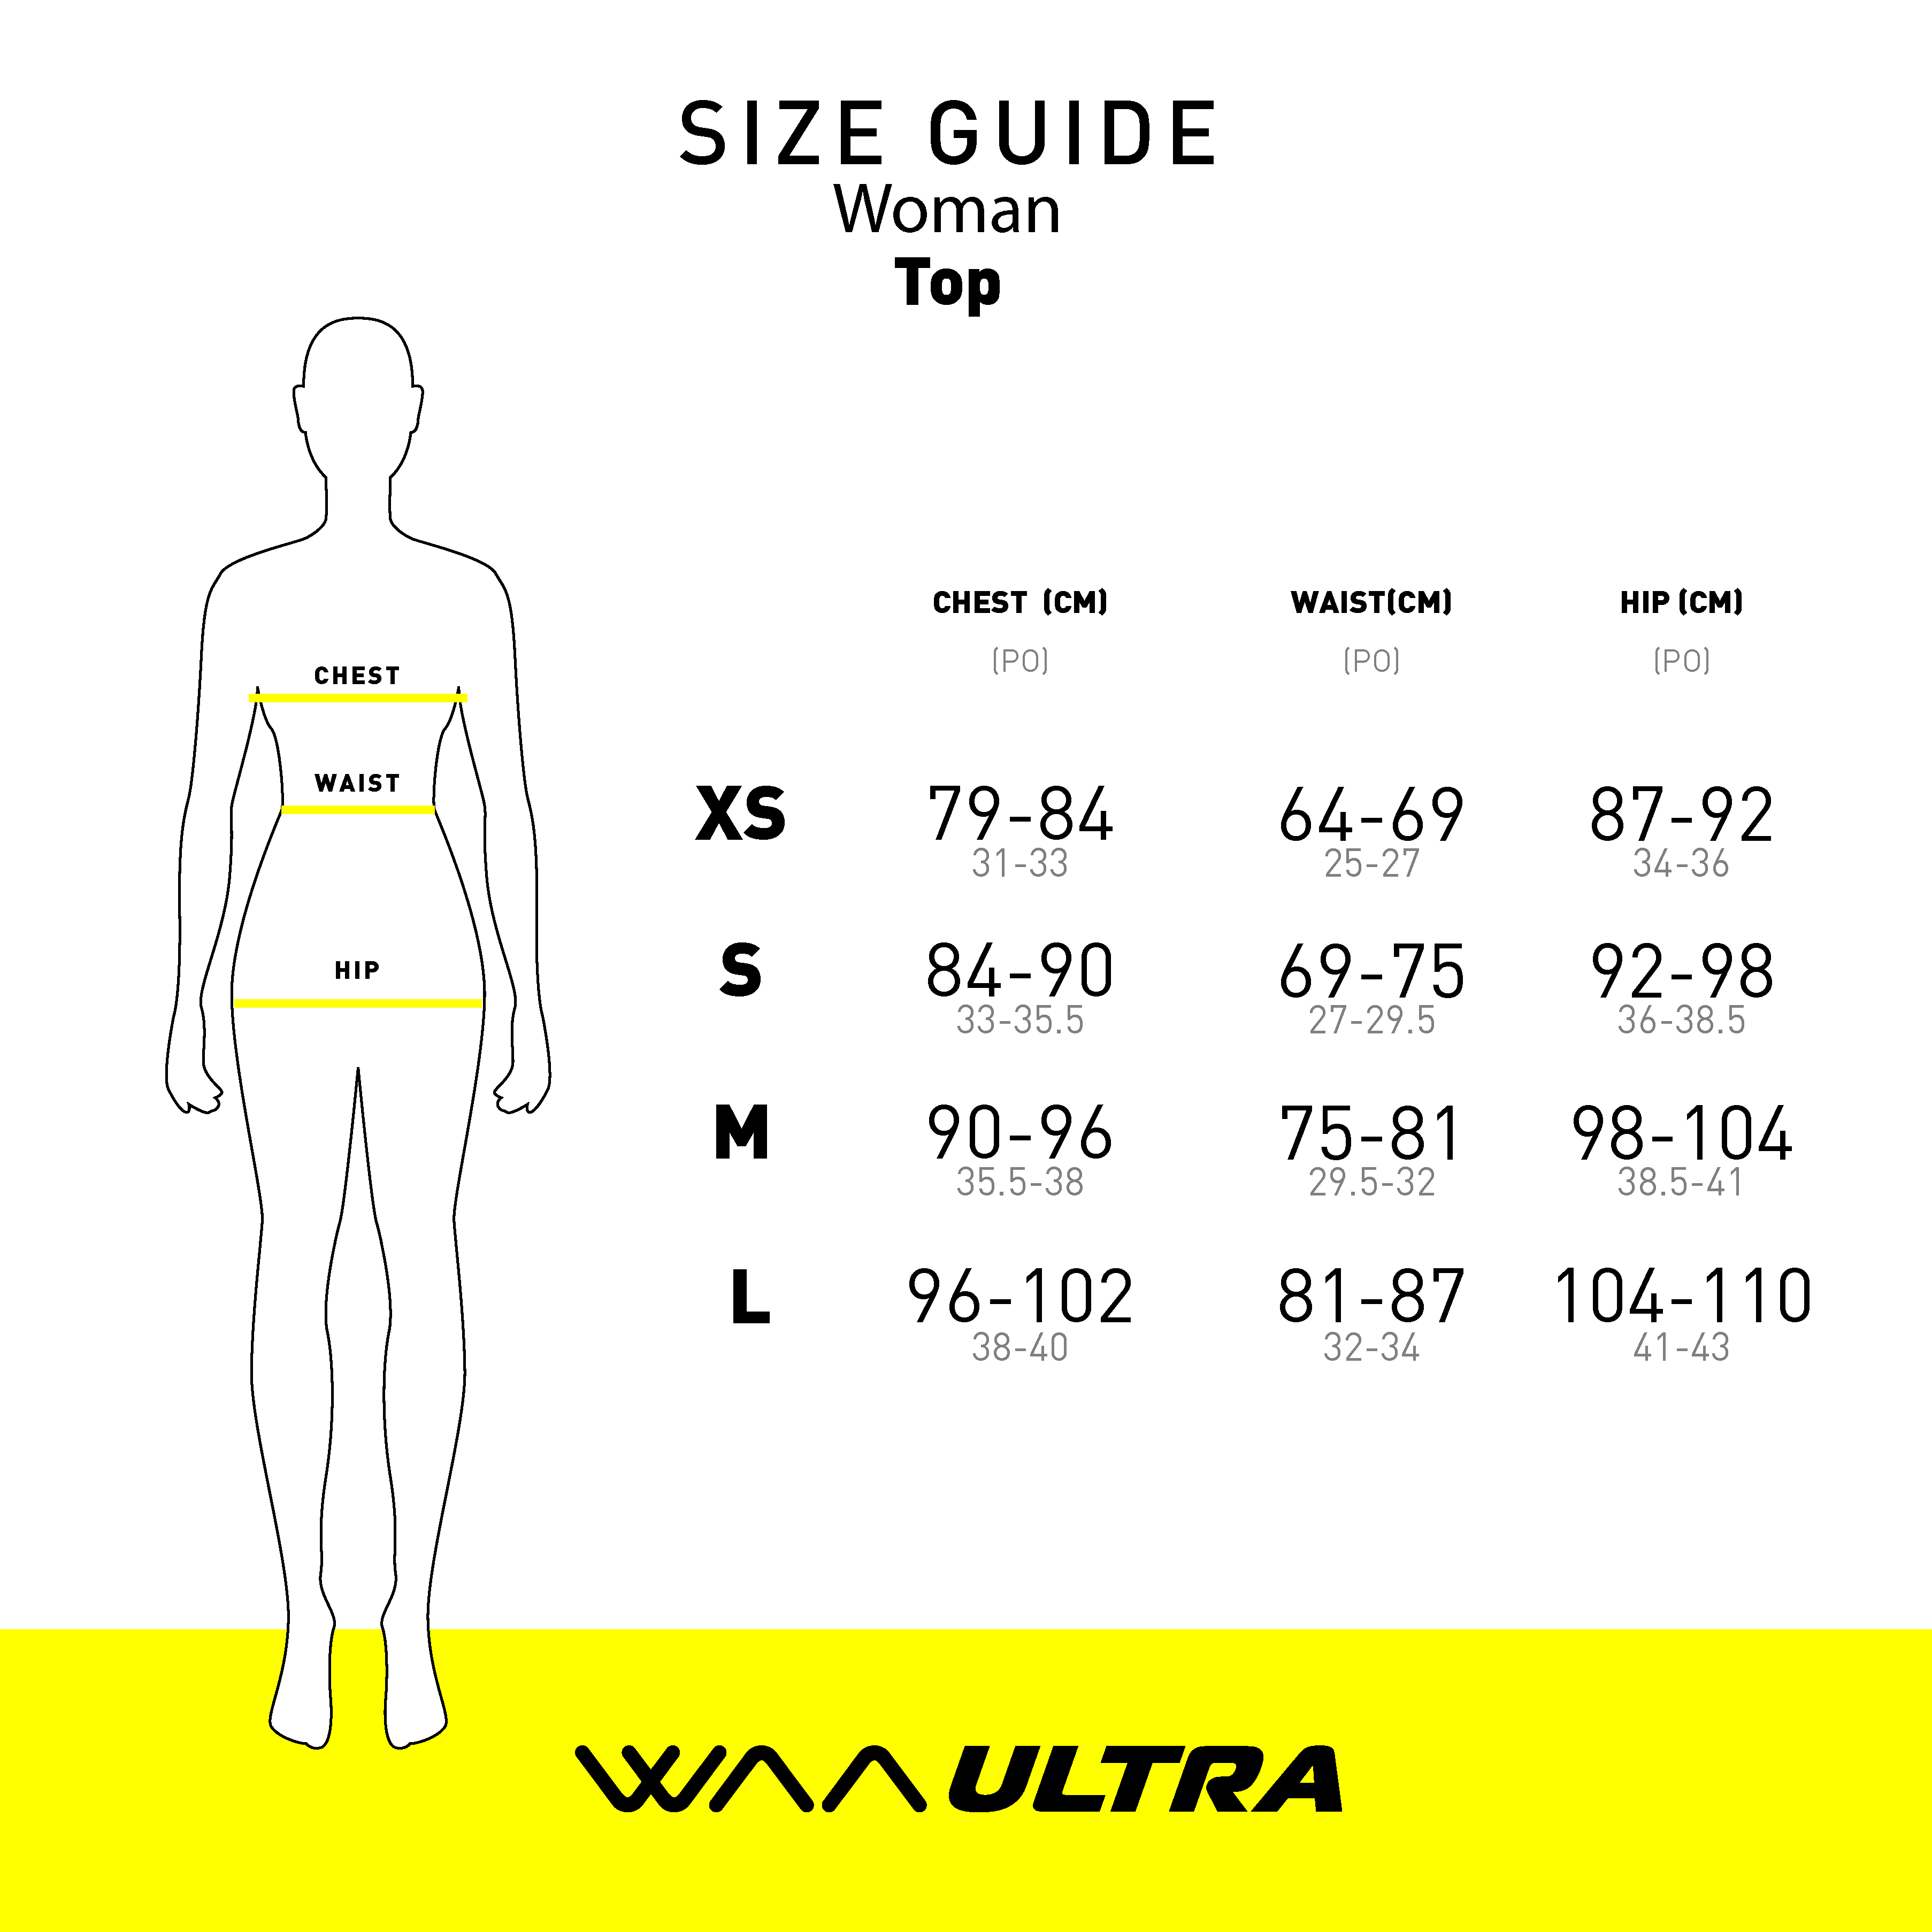 How to choose your size?